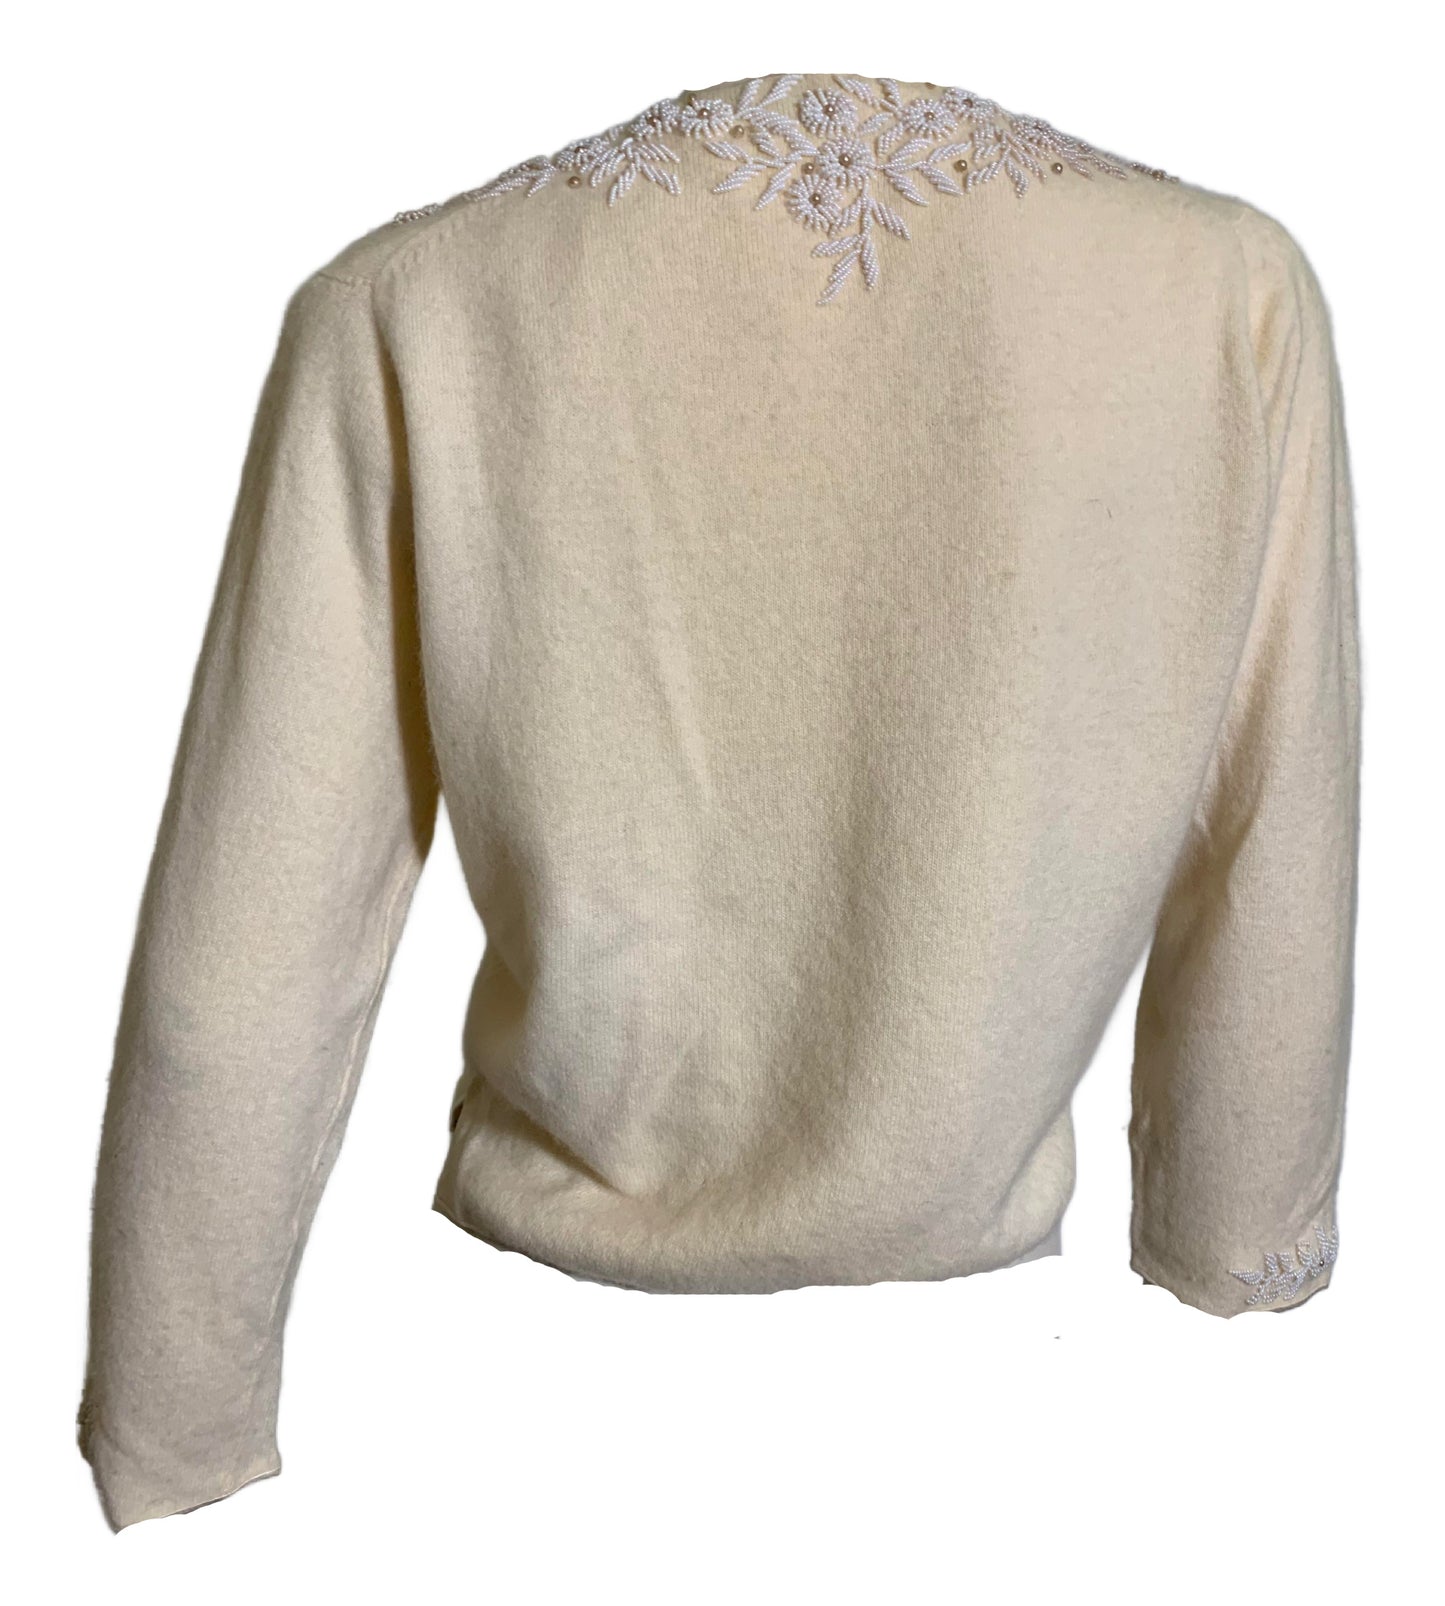 Soft Ivory Cashmere Faux Pearl Beaded Button Front Cardigan Sweater circa 1960s